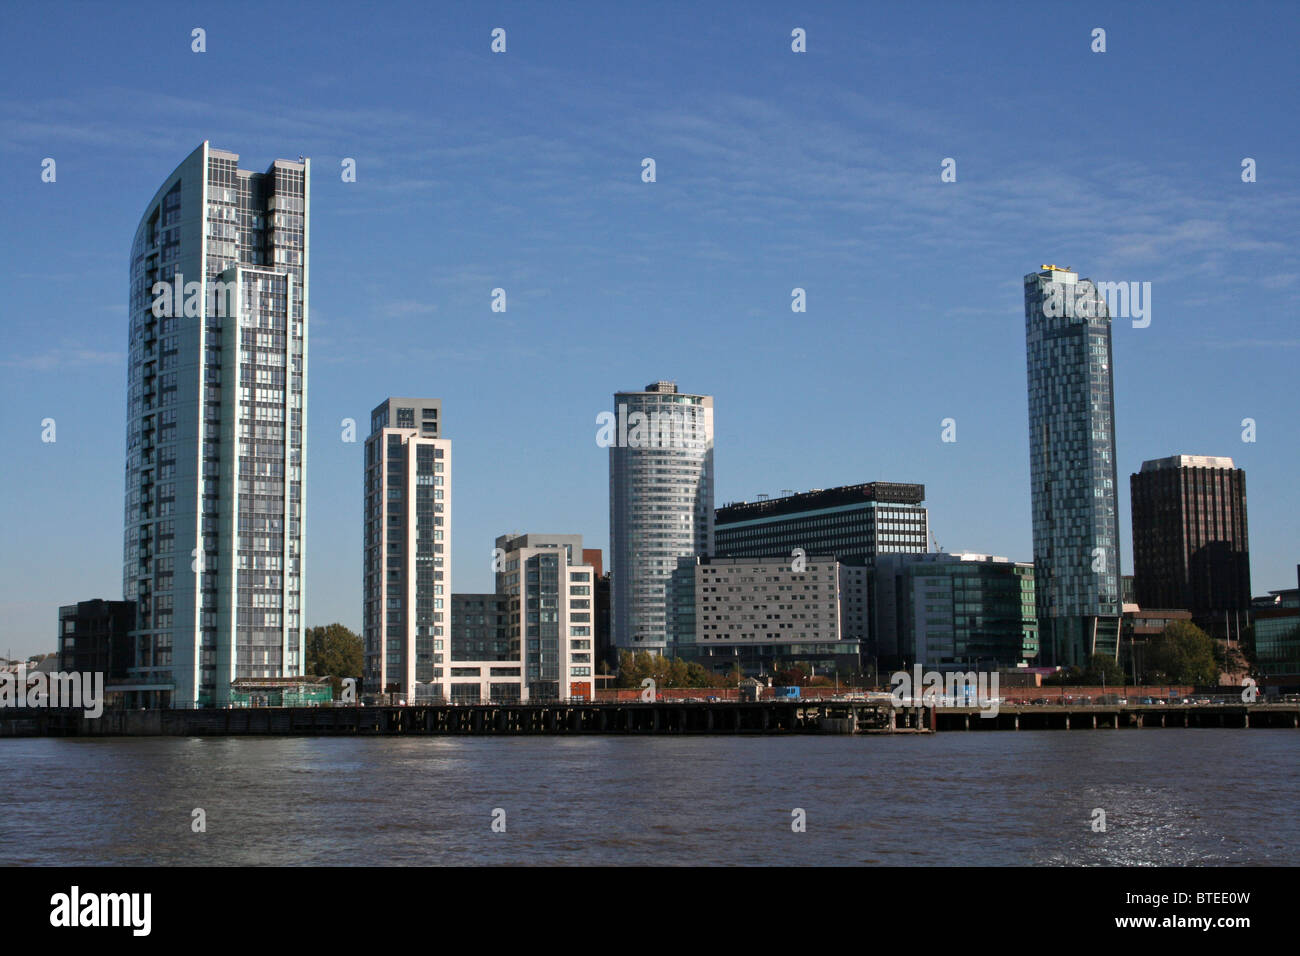 Liverpool Skyscrapers As Seen From The River Mersey, UK Stock Photo